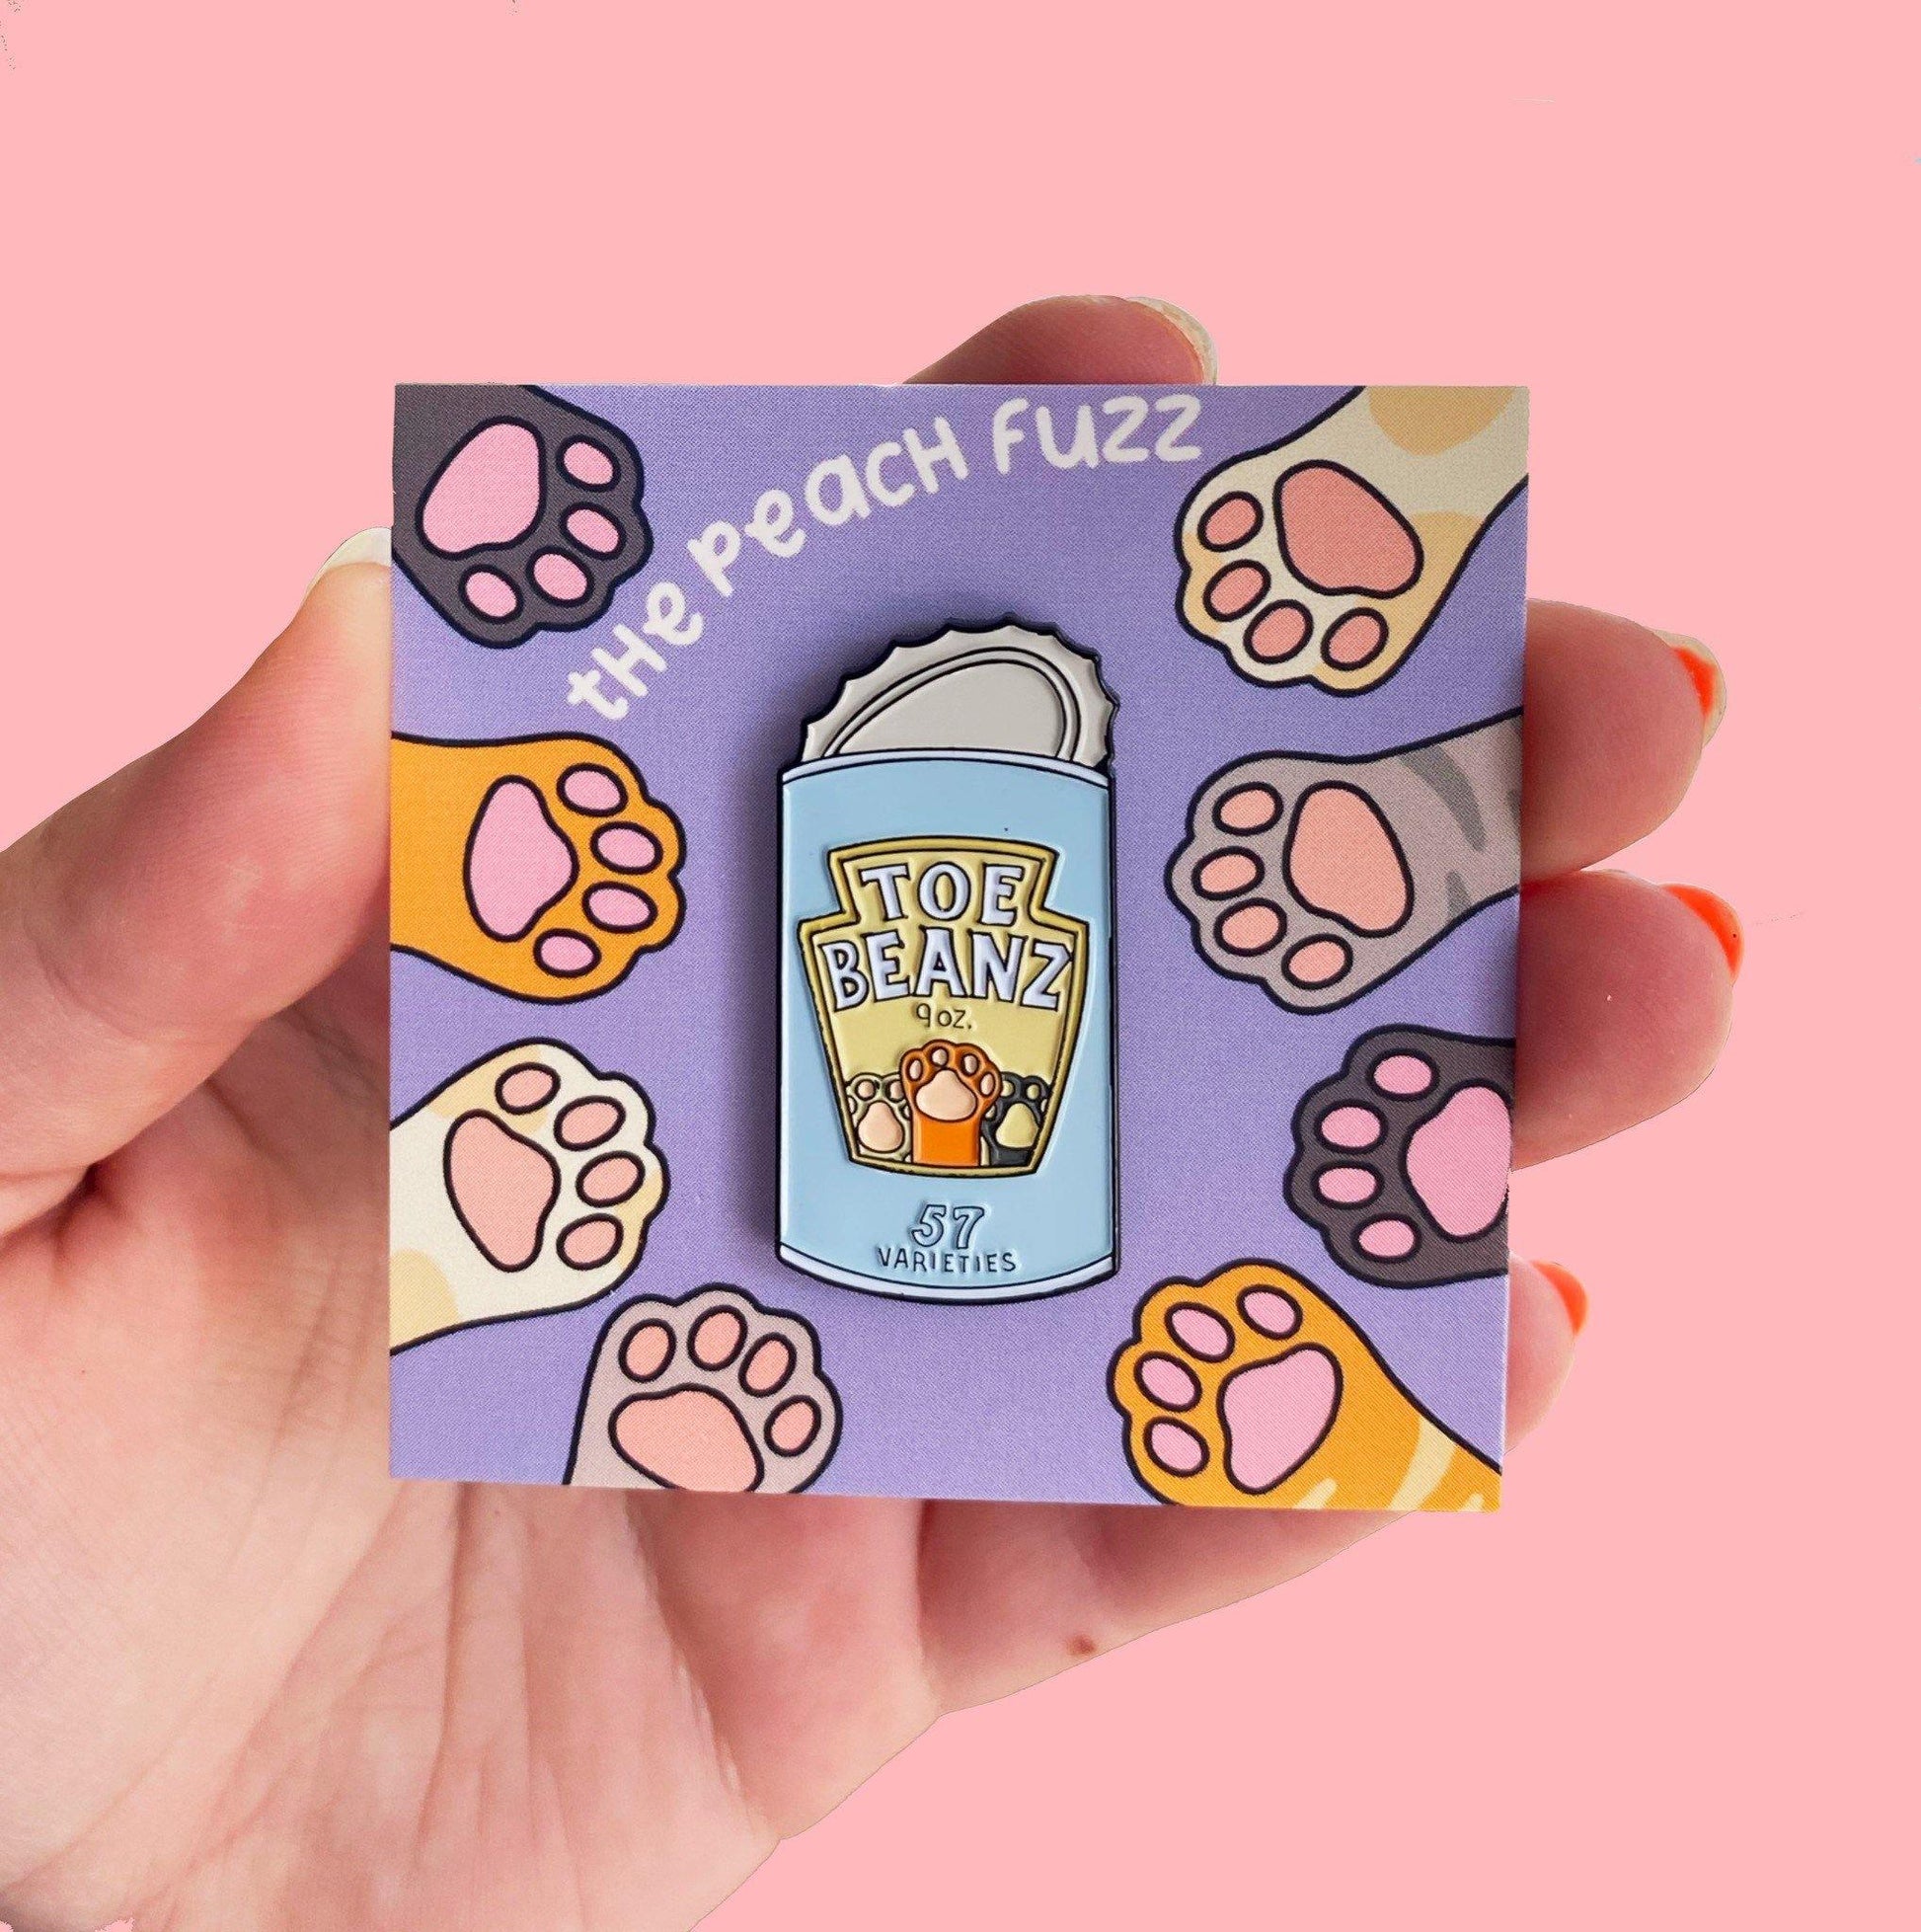 A soft enamel pin of a can of beans with the lid open and the label for the beans says “toe beans” with three little cat paws reaching up. The backing card has dark brown, yellow, white, orange, and gray cat paws reaching towards the center where the pin is.